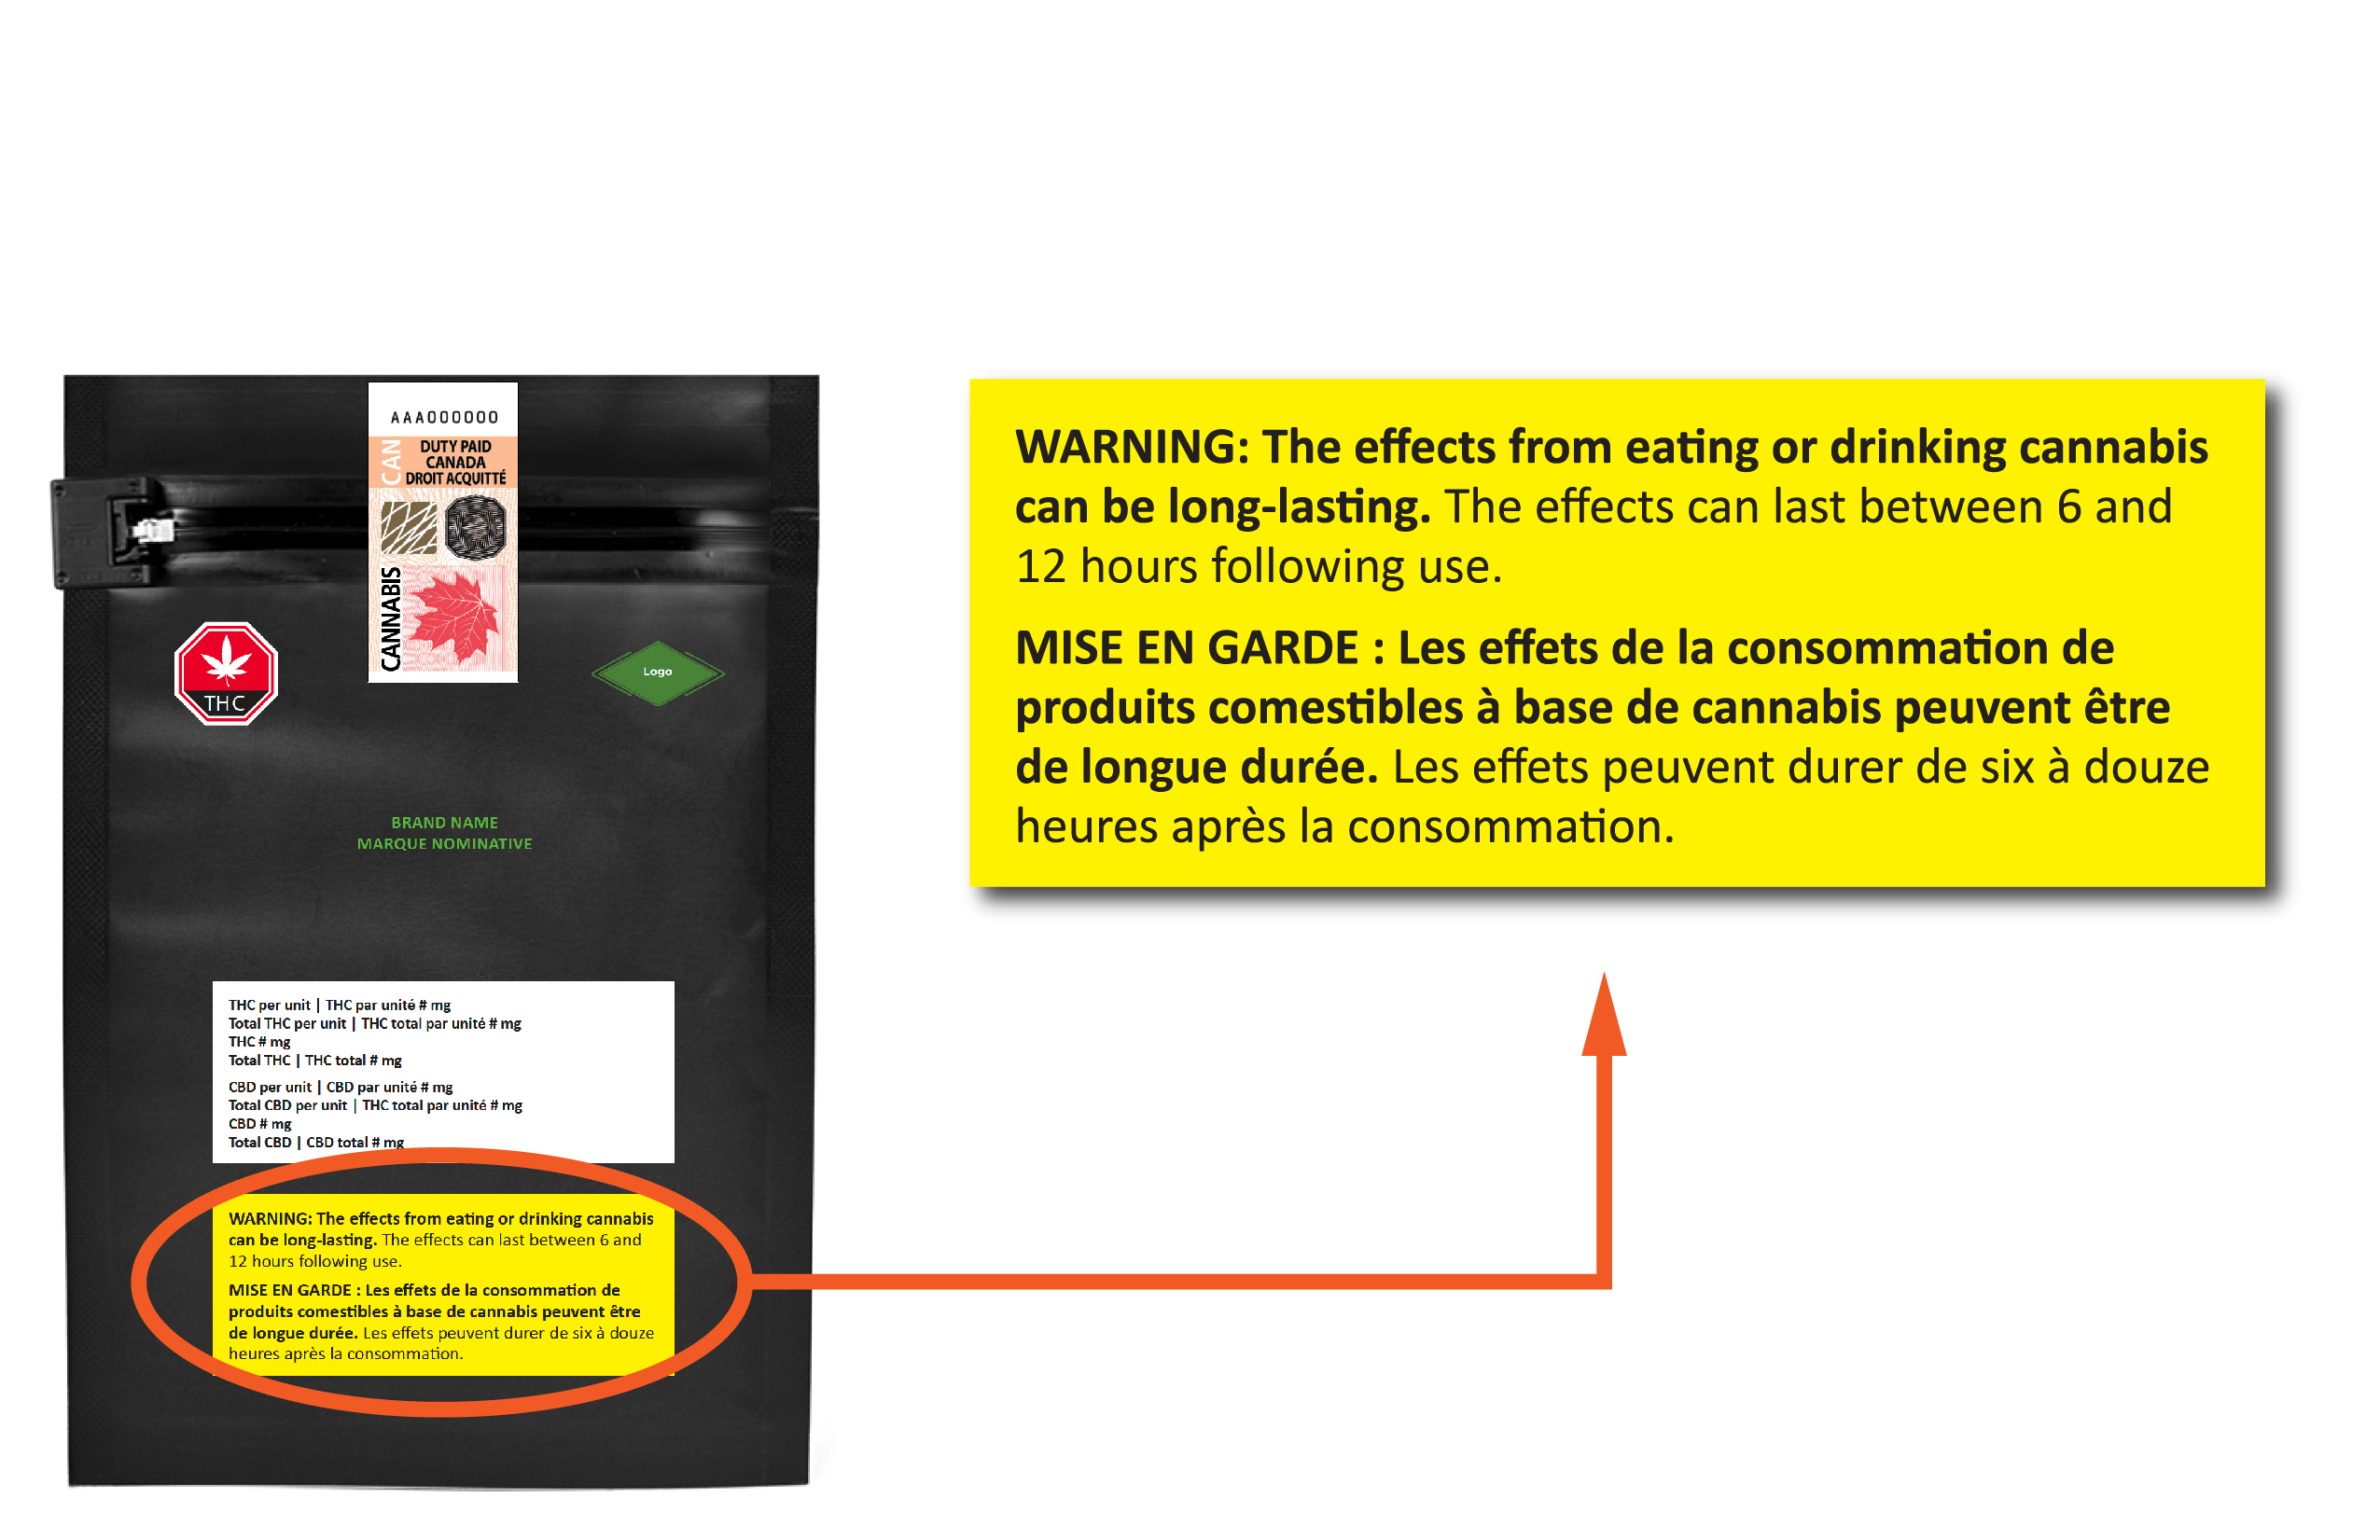 Example of other required information on edible cannabis packaging